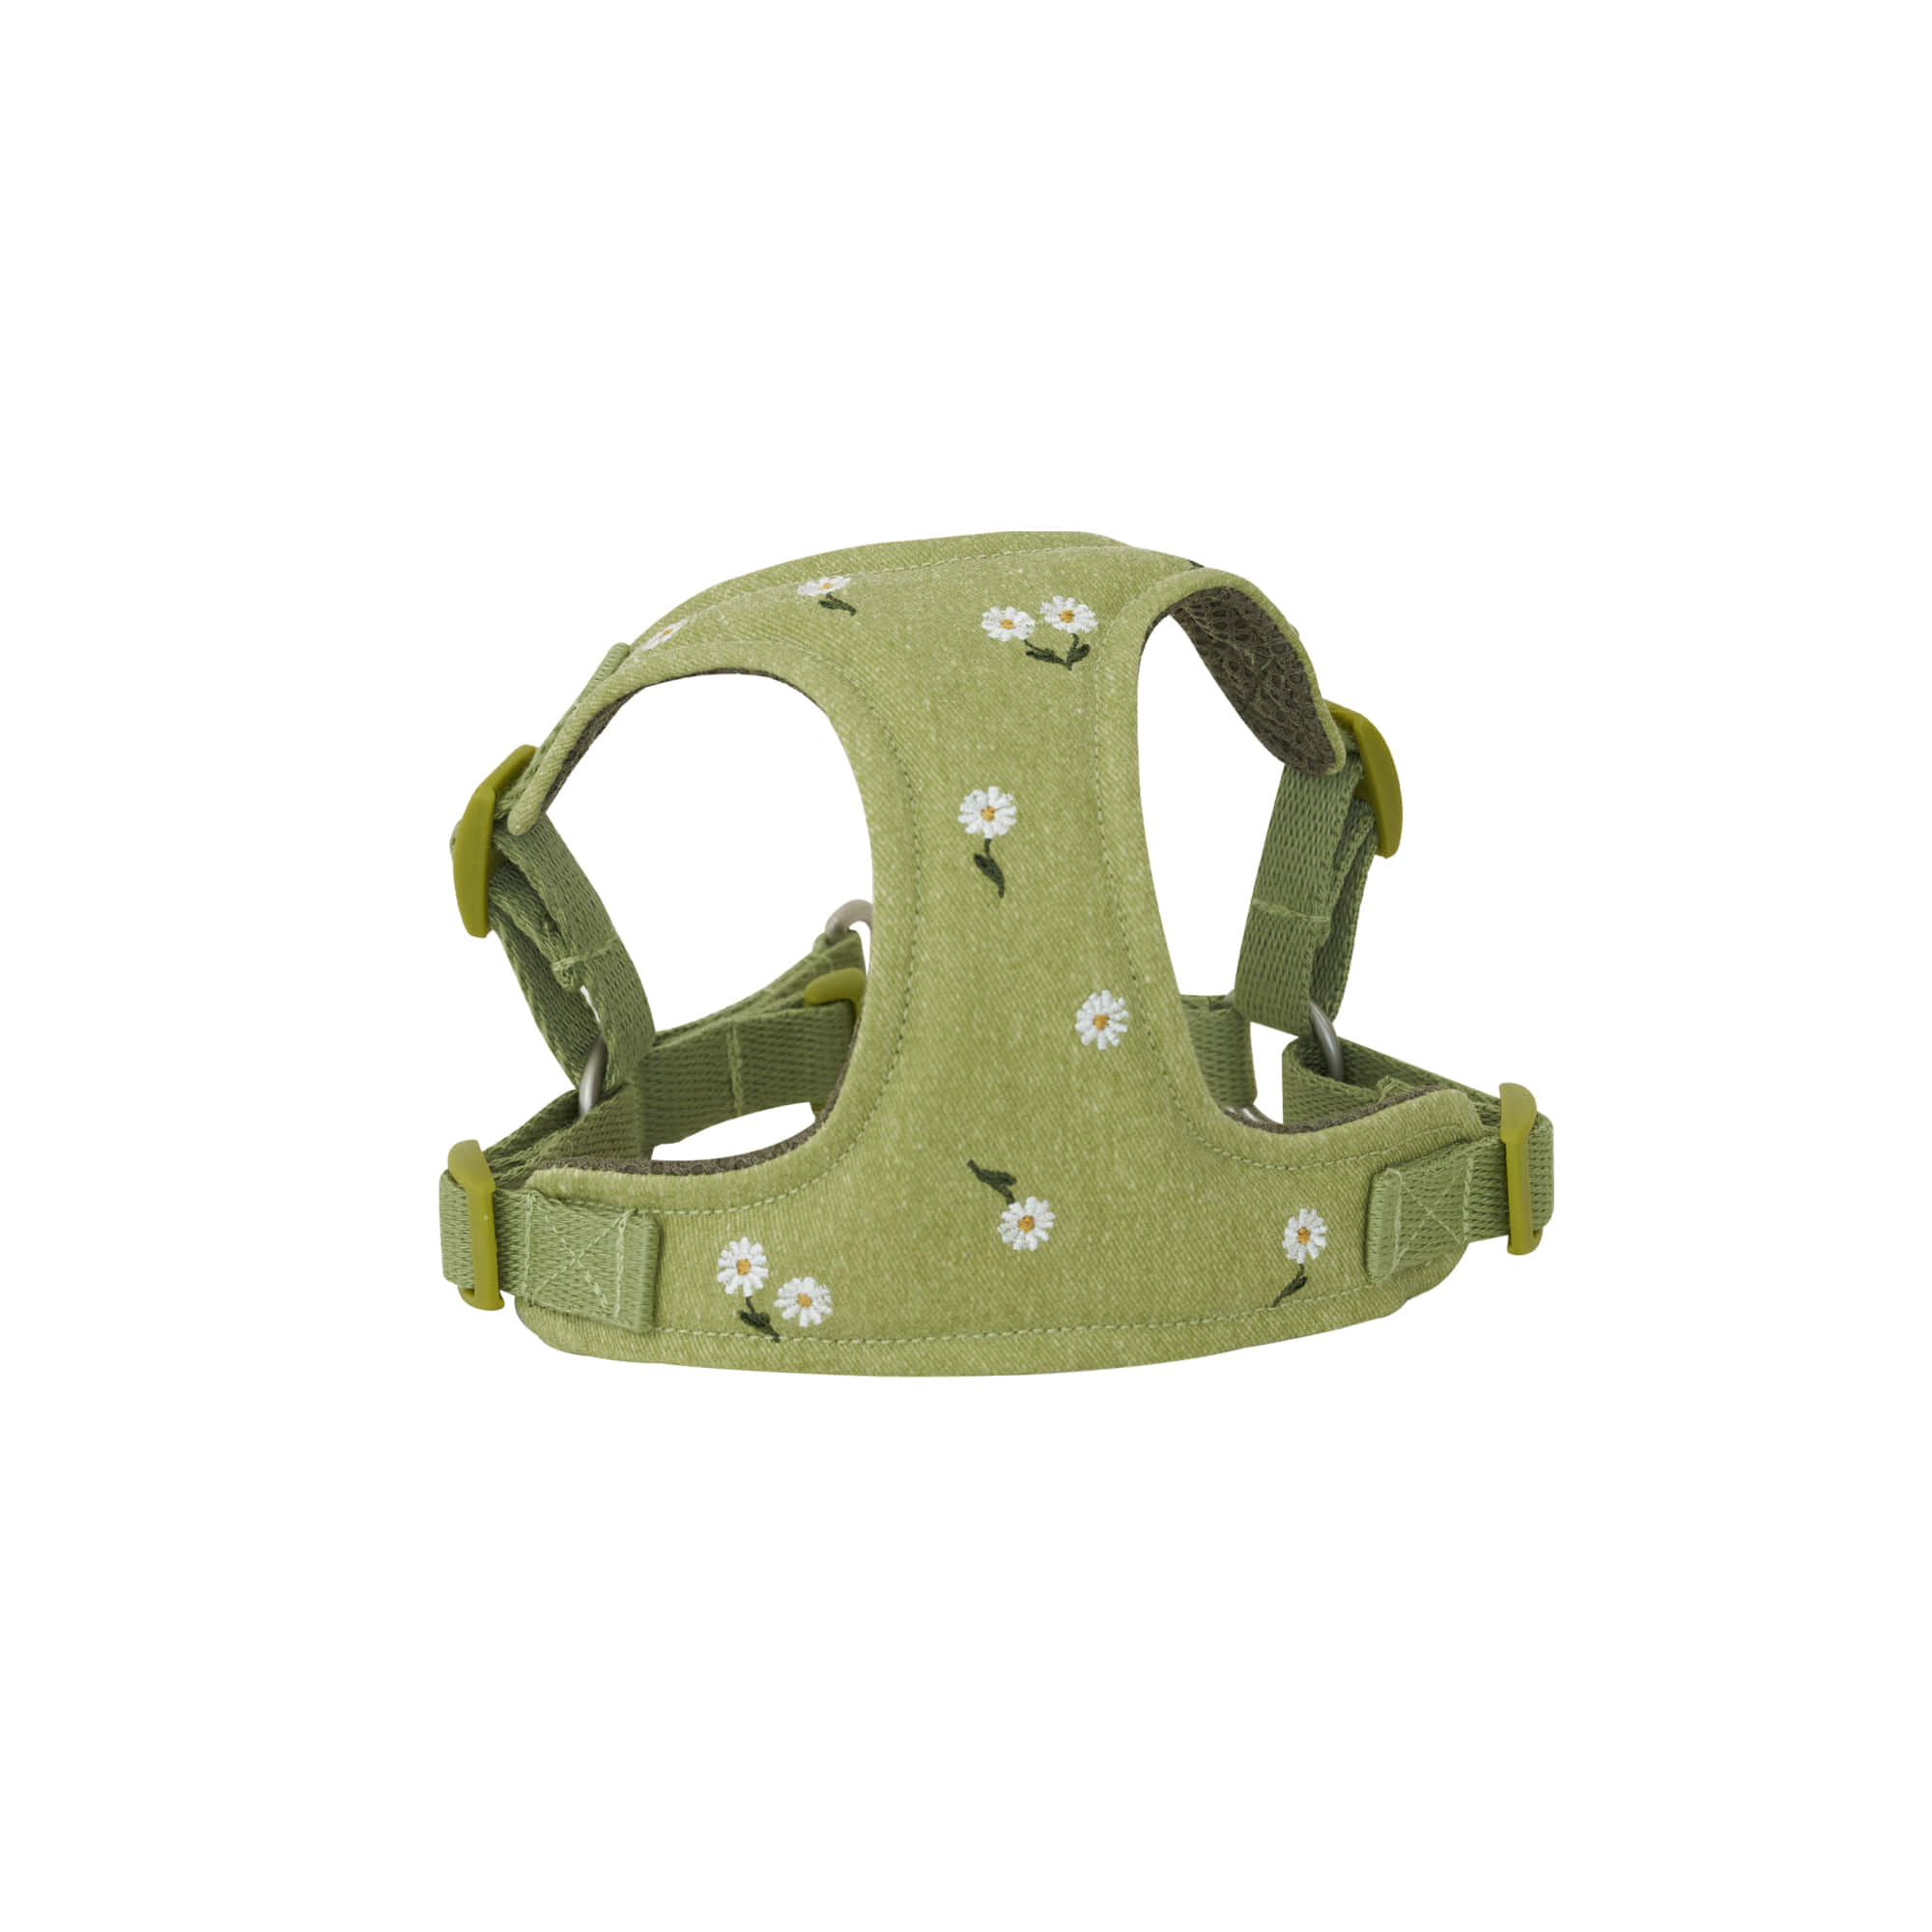 Daisy flower X type harness (Olive)